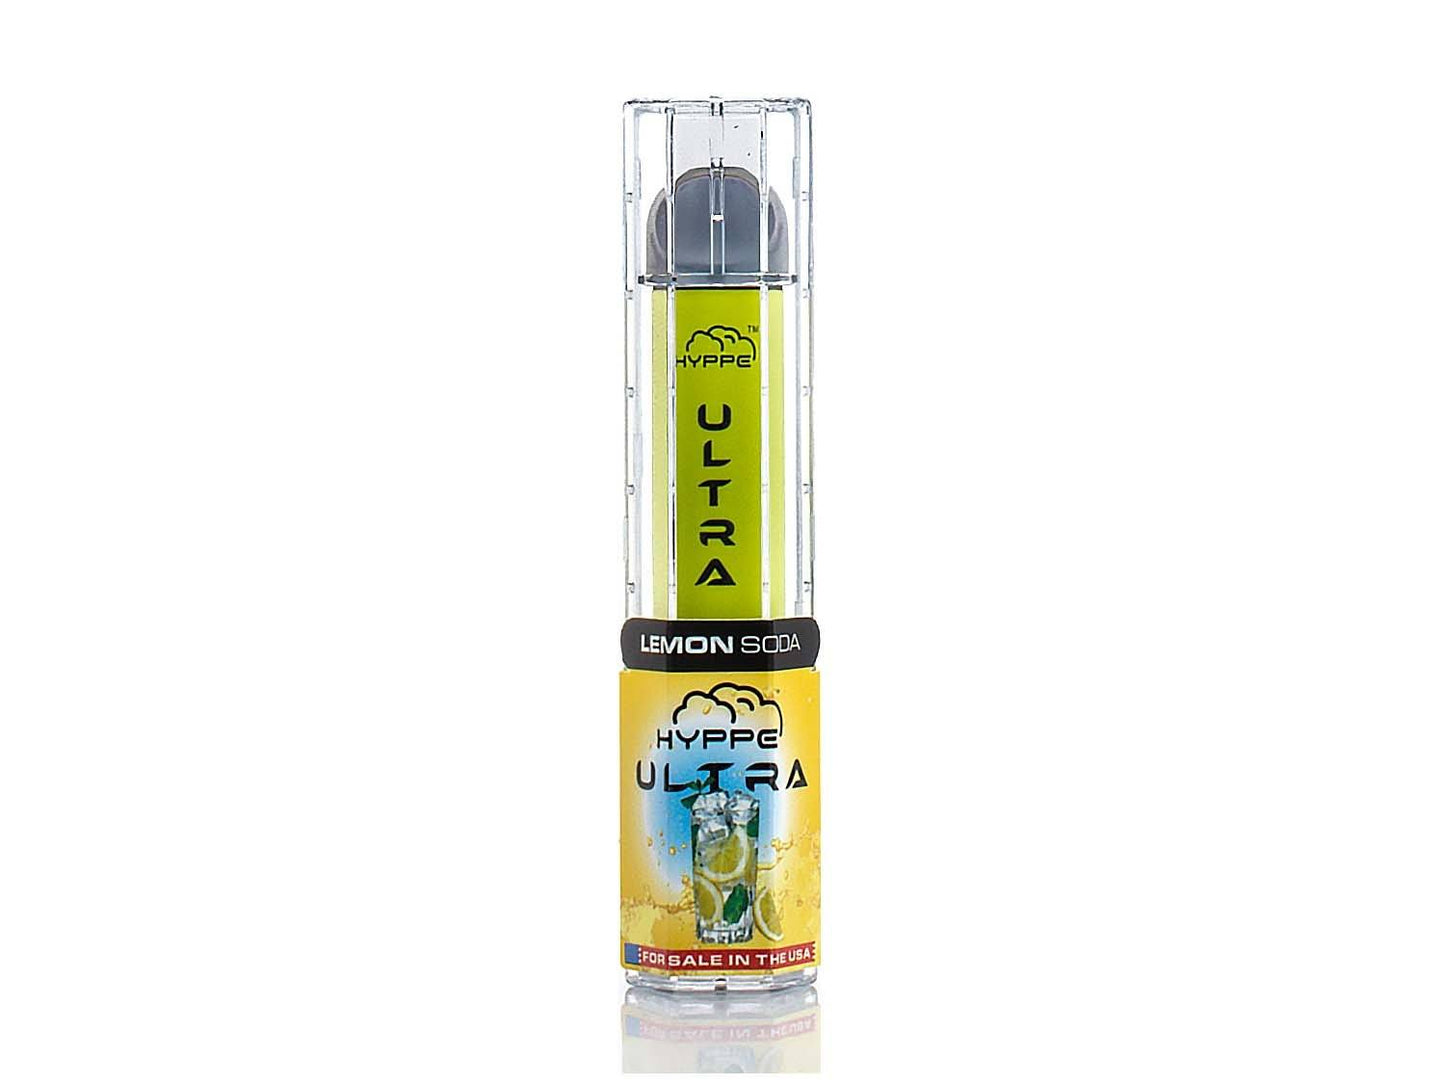 HYPPE Ultra Disposable Device - 600 Puffs Lemon Soda with Packaging